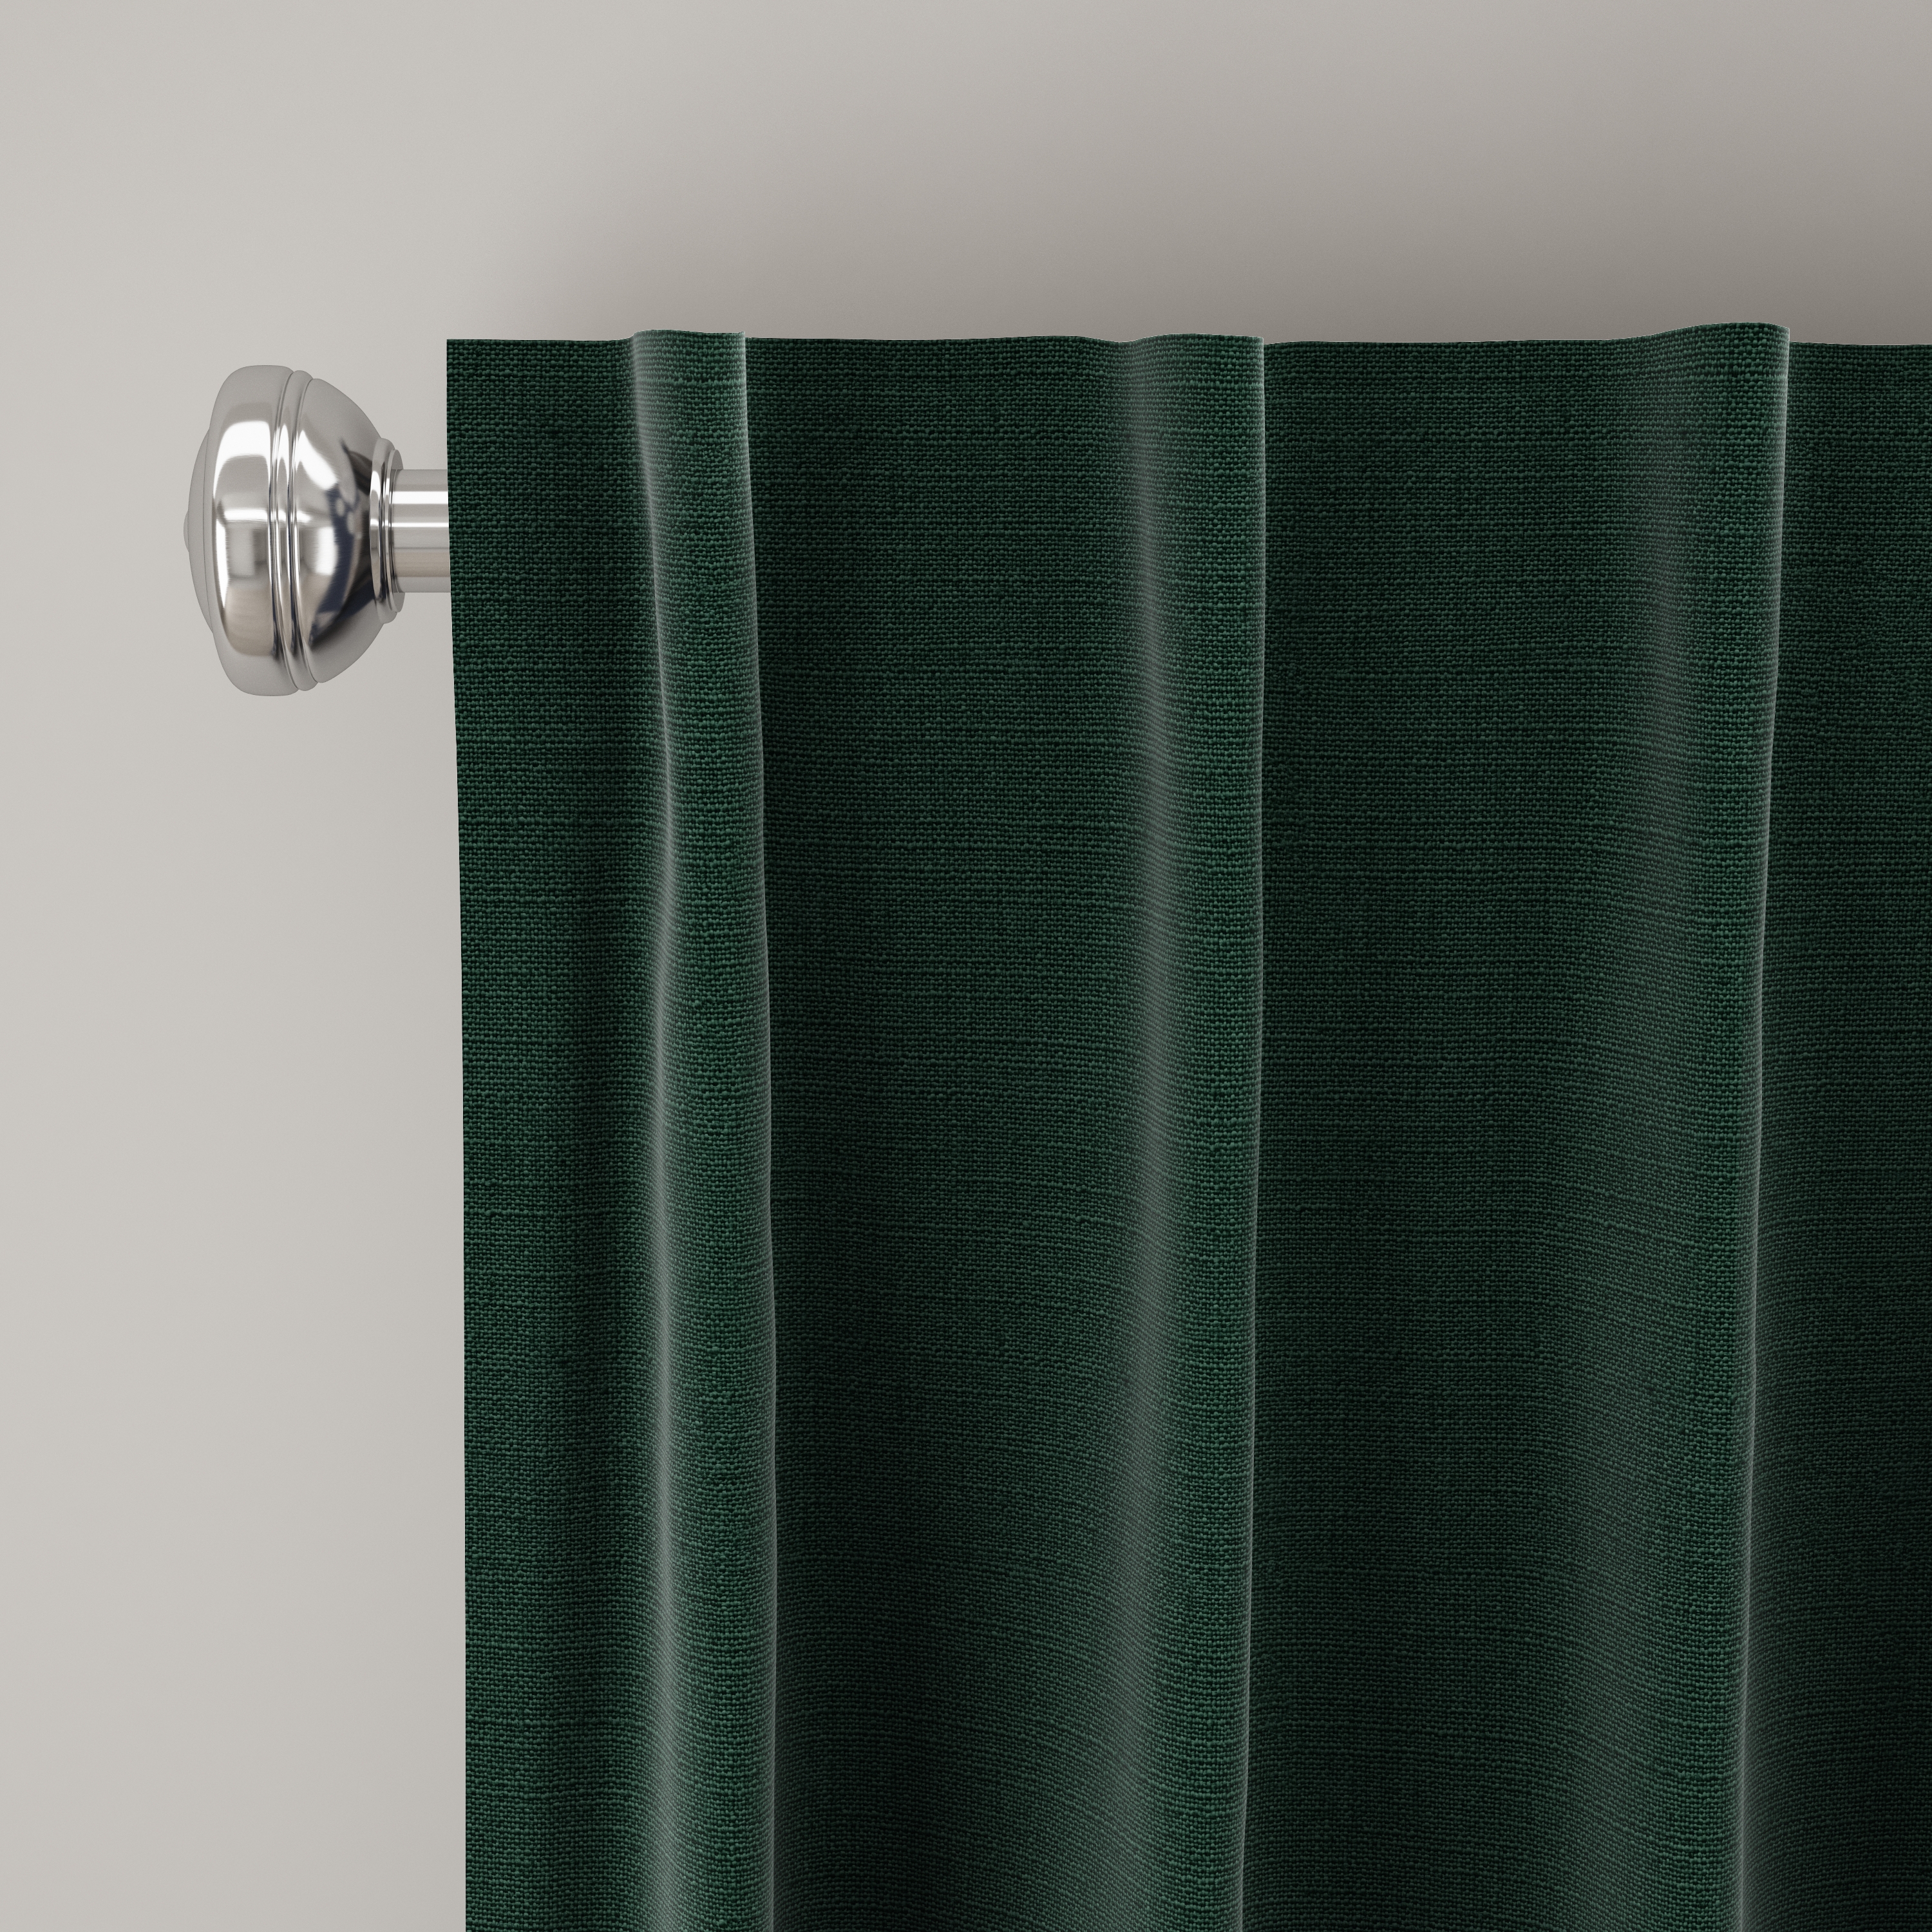 Conifer Green Curtain Panel, 108" x 50" Unlined - Image 1